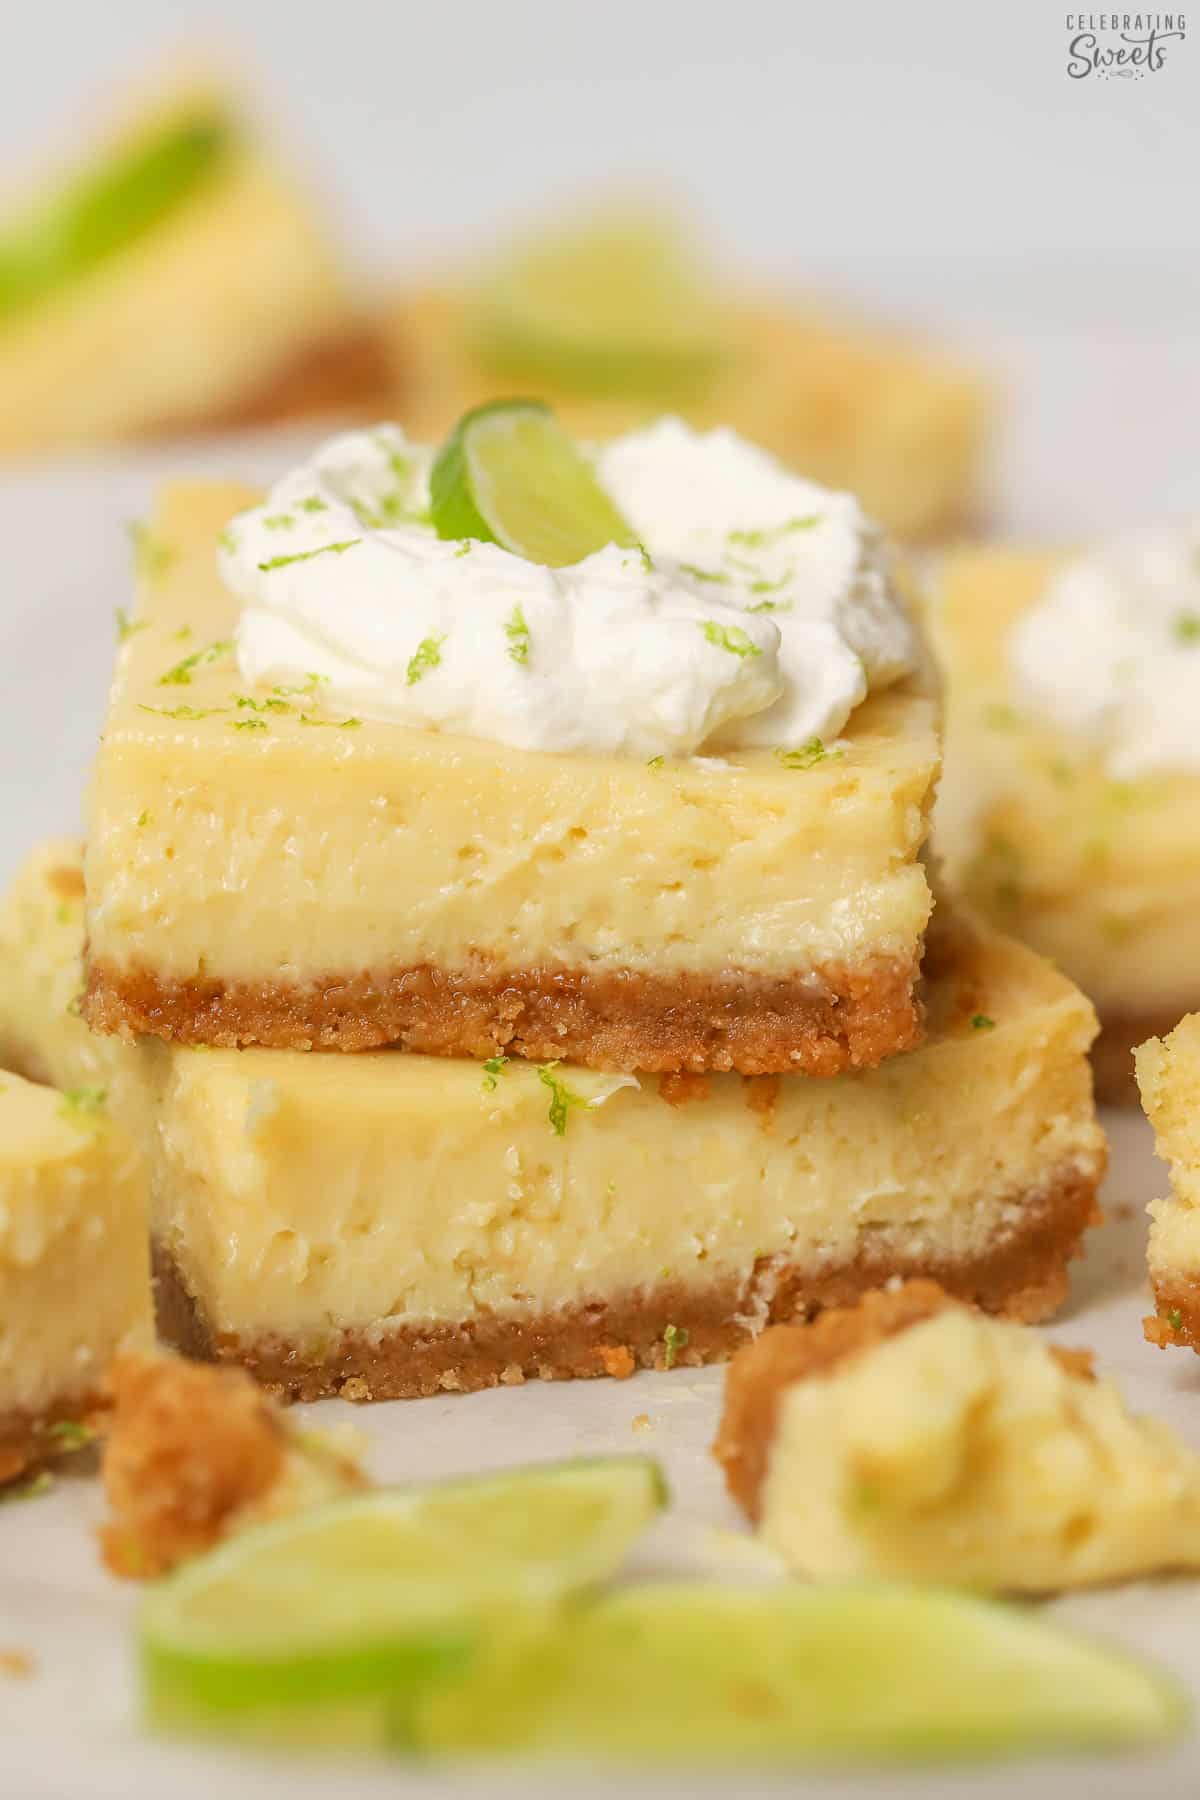 Stack of two key lime pie bars garnished with whipped cream and sliced lime.